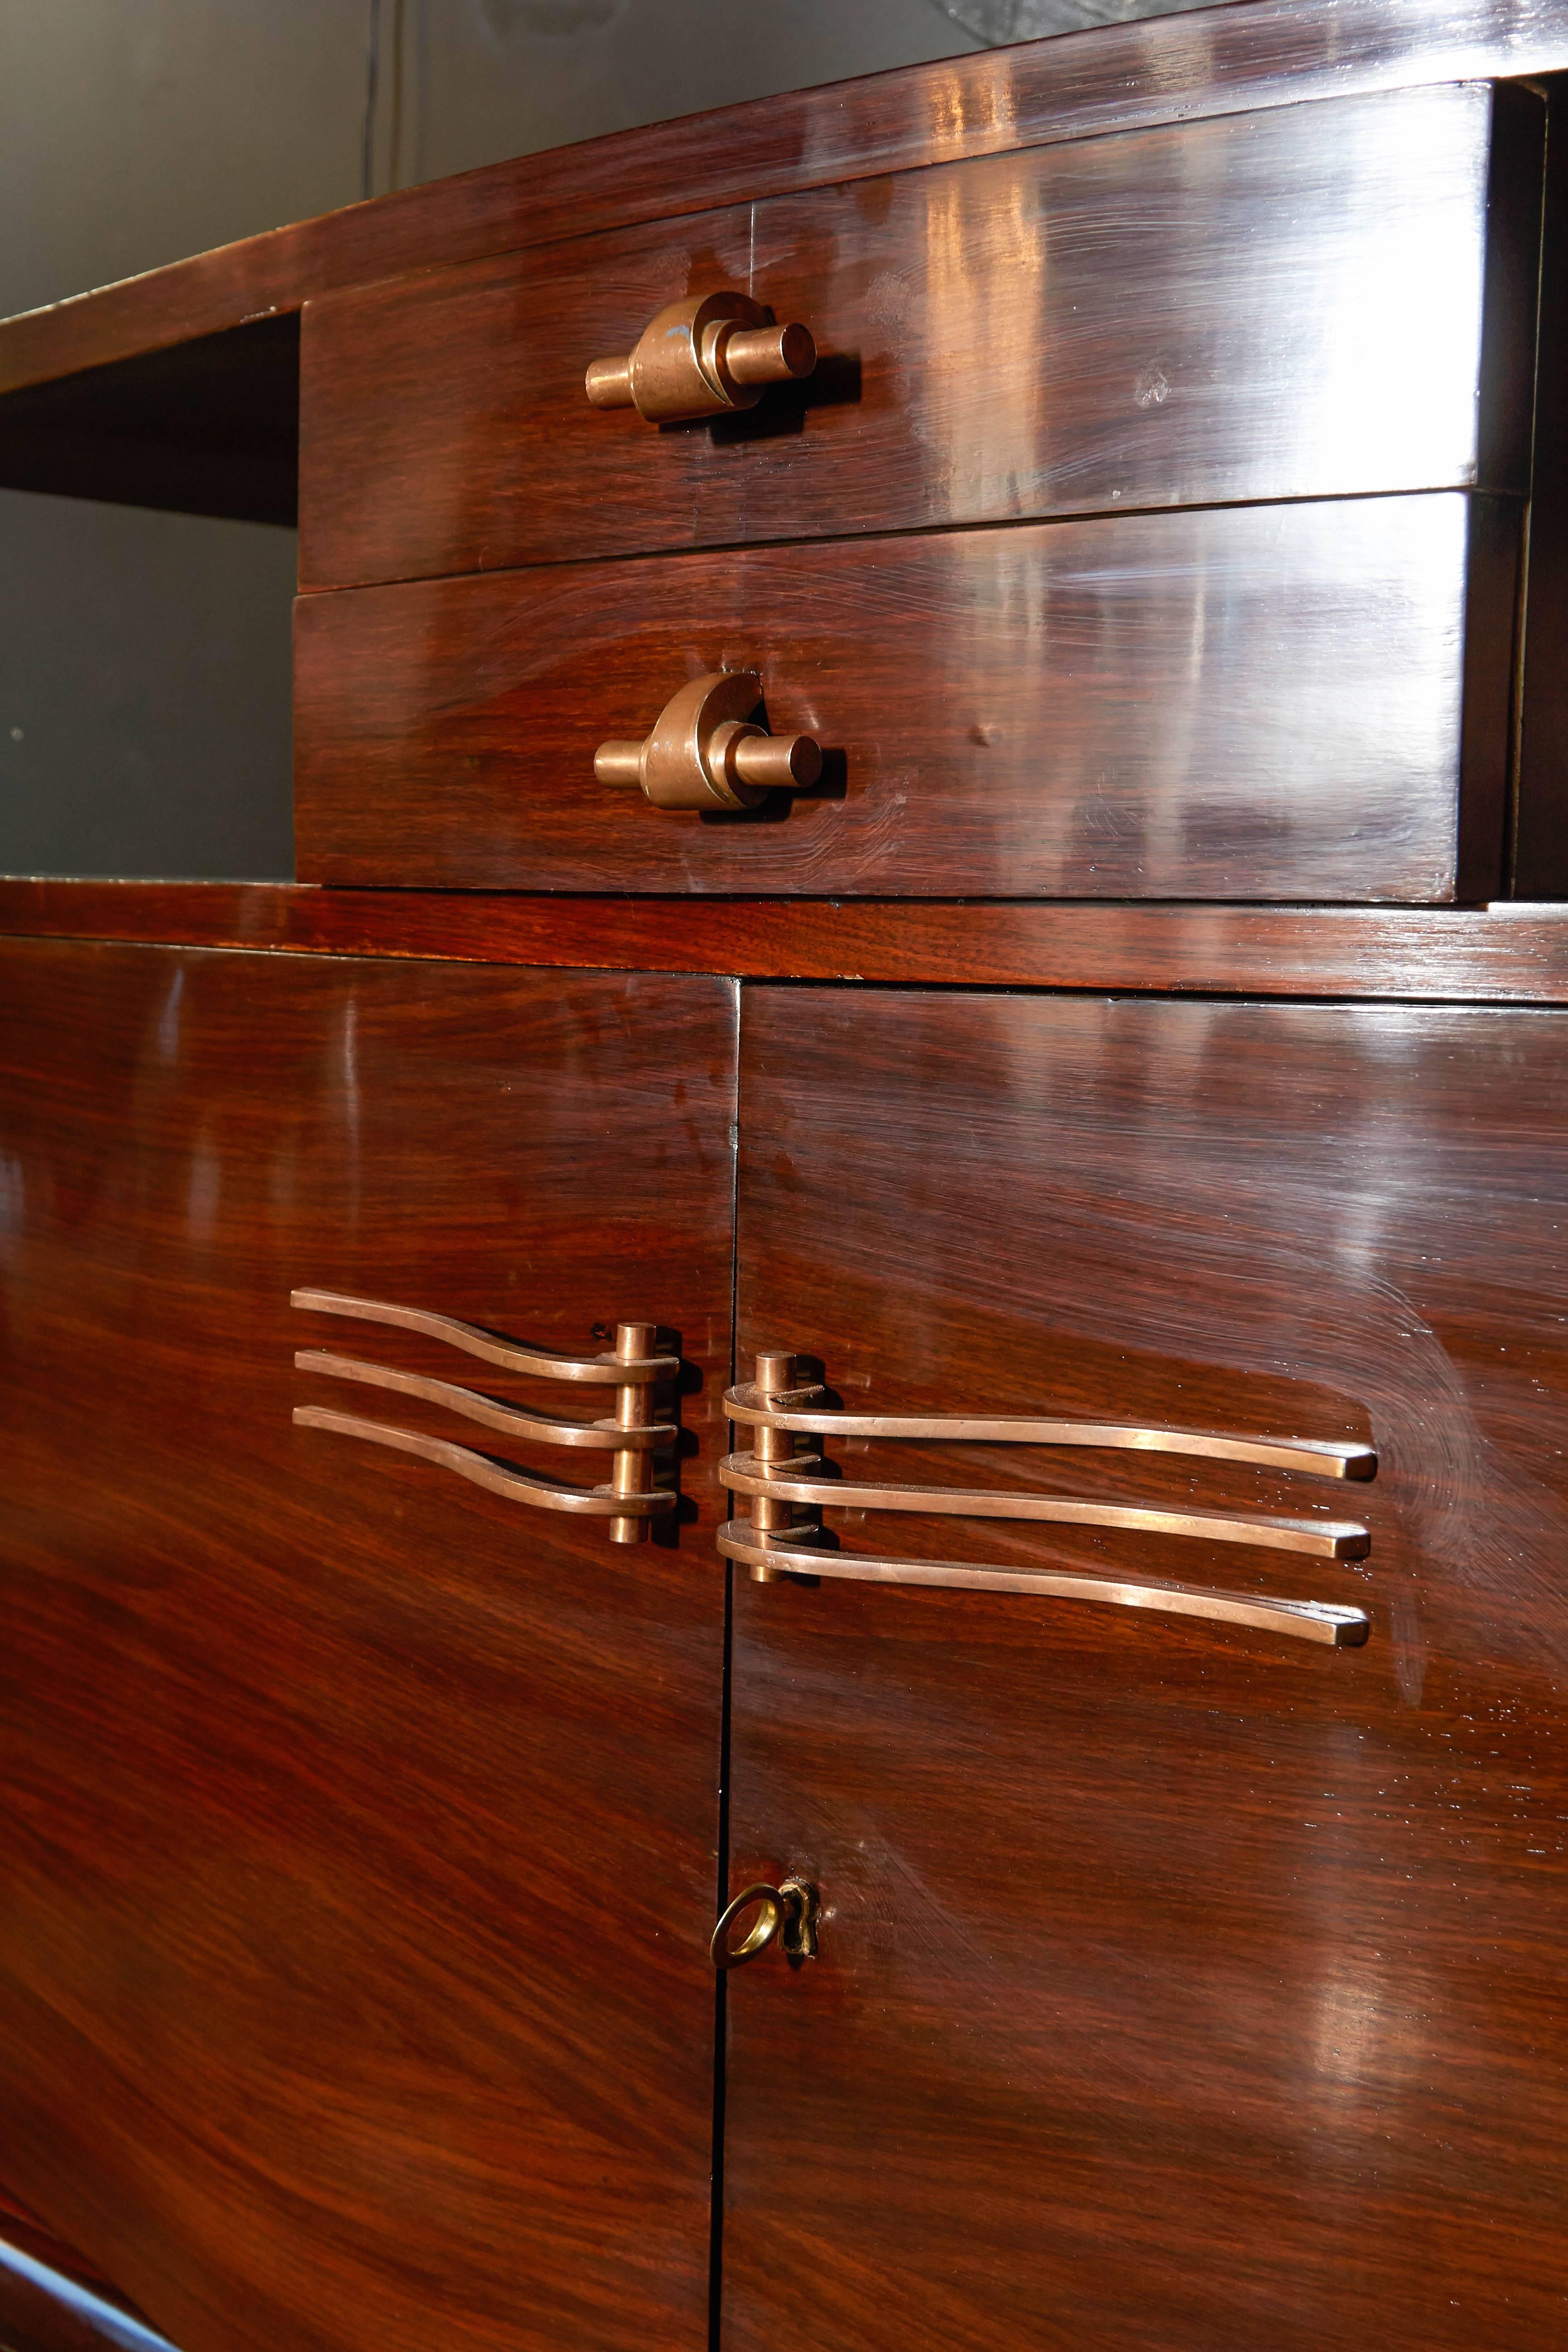 Exquisite Art Deco sideboard comprised of bookmatched rosewood with a semi-gloss French polish. The sideboard features elegant bow fronts with slightly scrolled or arched cabinet doors. Fitted with two top center drawers, as well as open cabinet